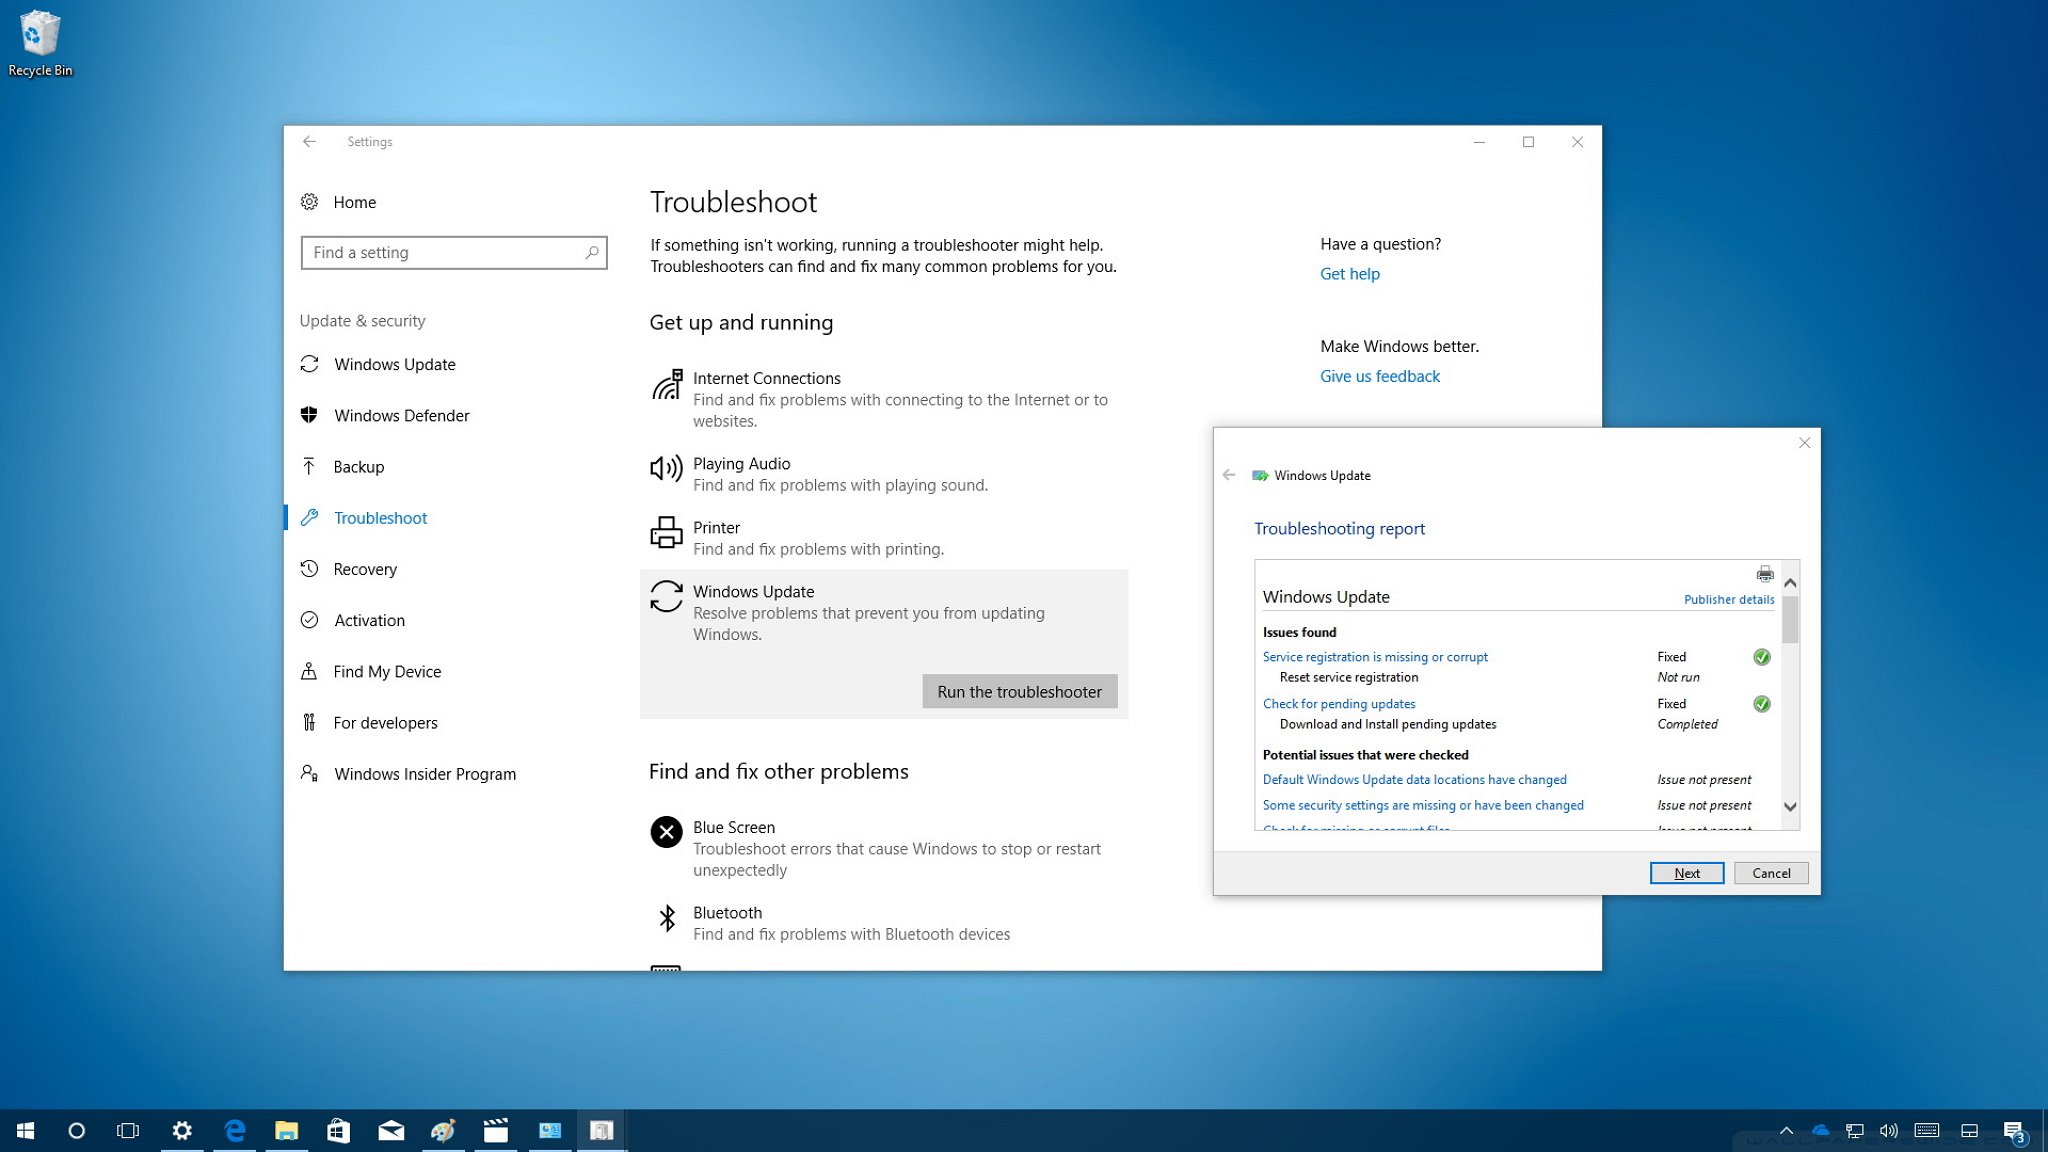 Use the Windows 10 built-in Troubleshooting tool: Access the Troubleshooting tool in the Control Panel or Settings app to automatically detect and fix any issues with your system's components.
Update your graphics card drivers: Ensure you have the latest drivers installed for your graphics card by visiting the manufacturer's website or using Windows Update.